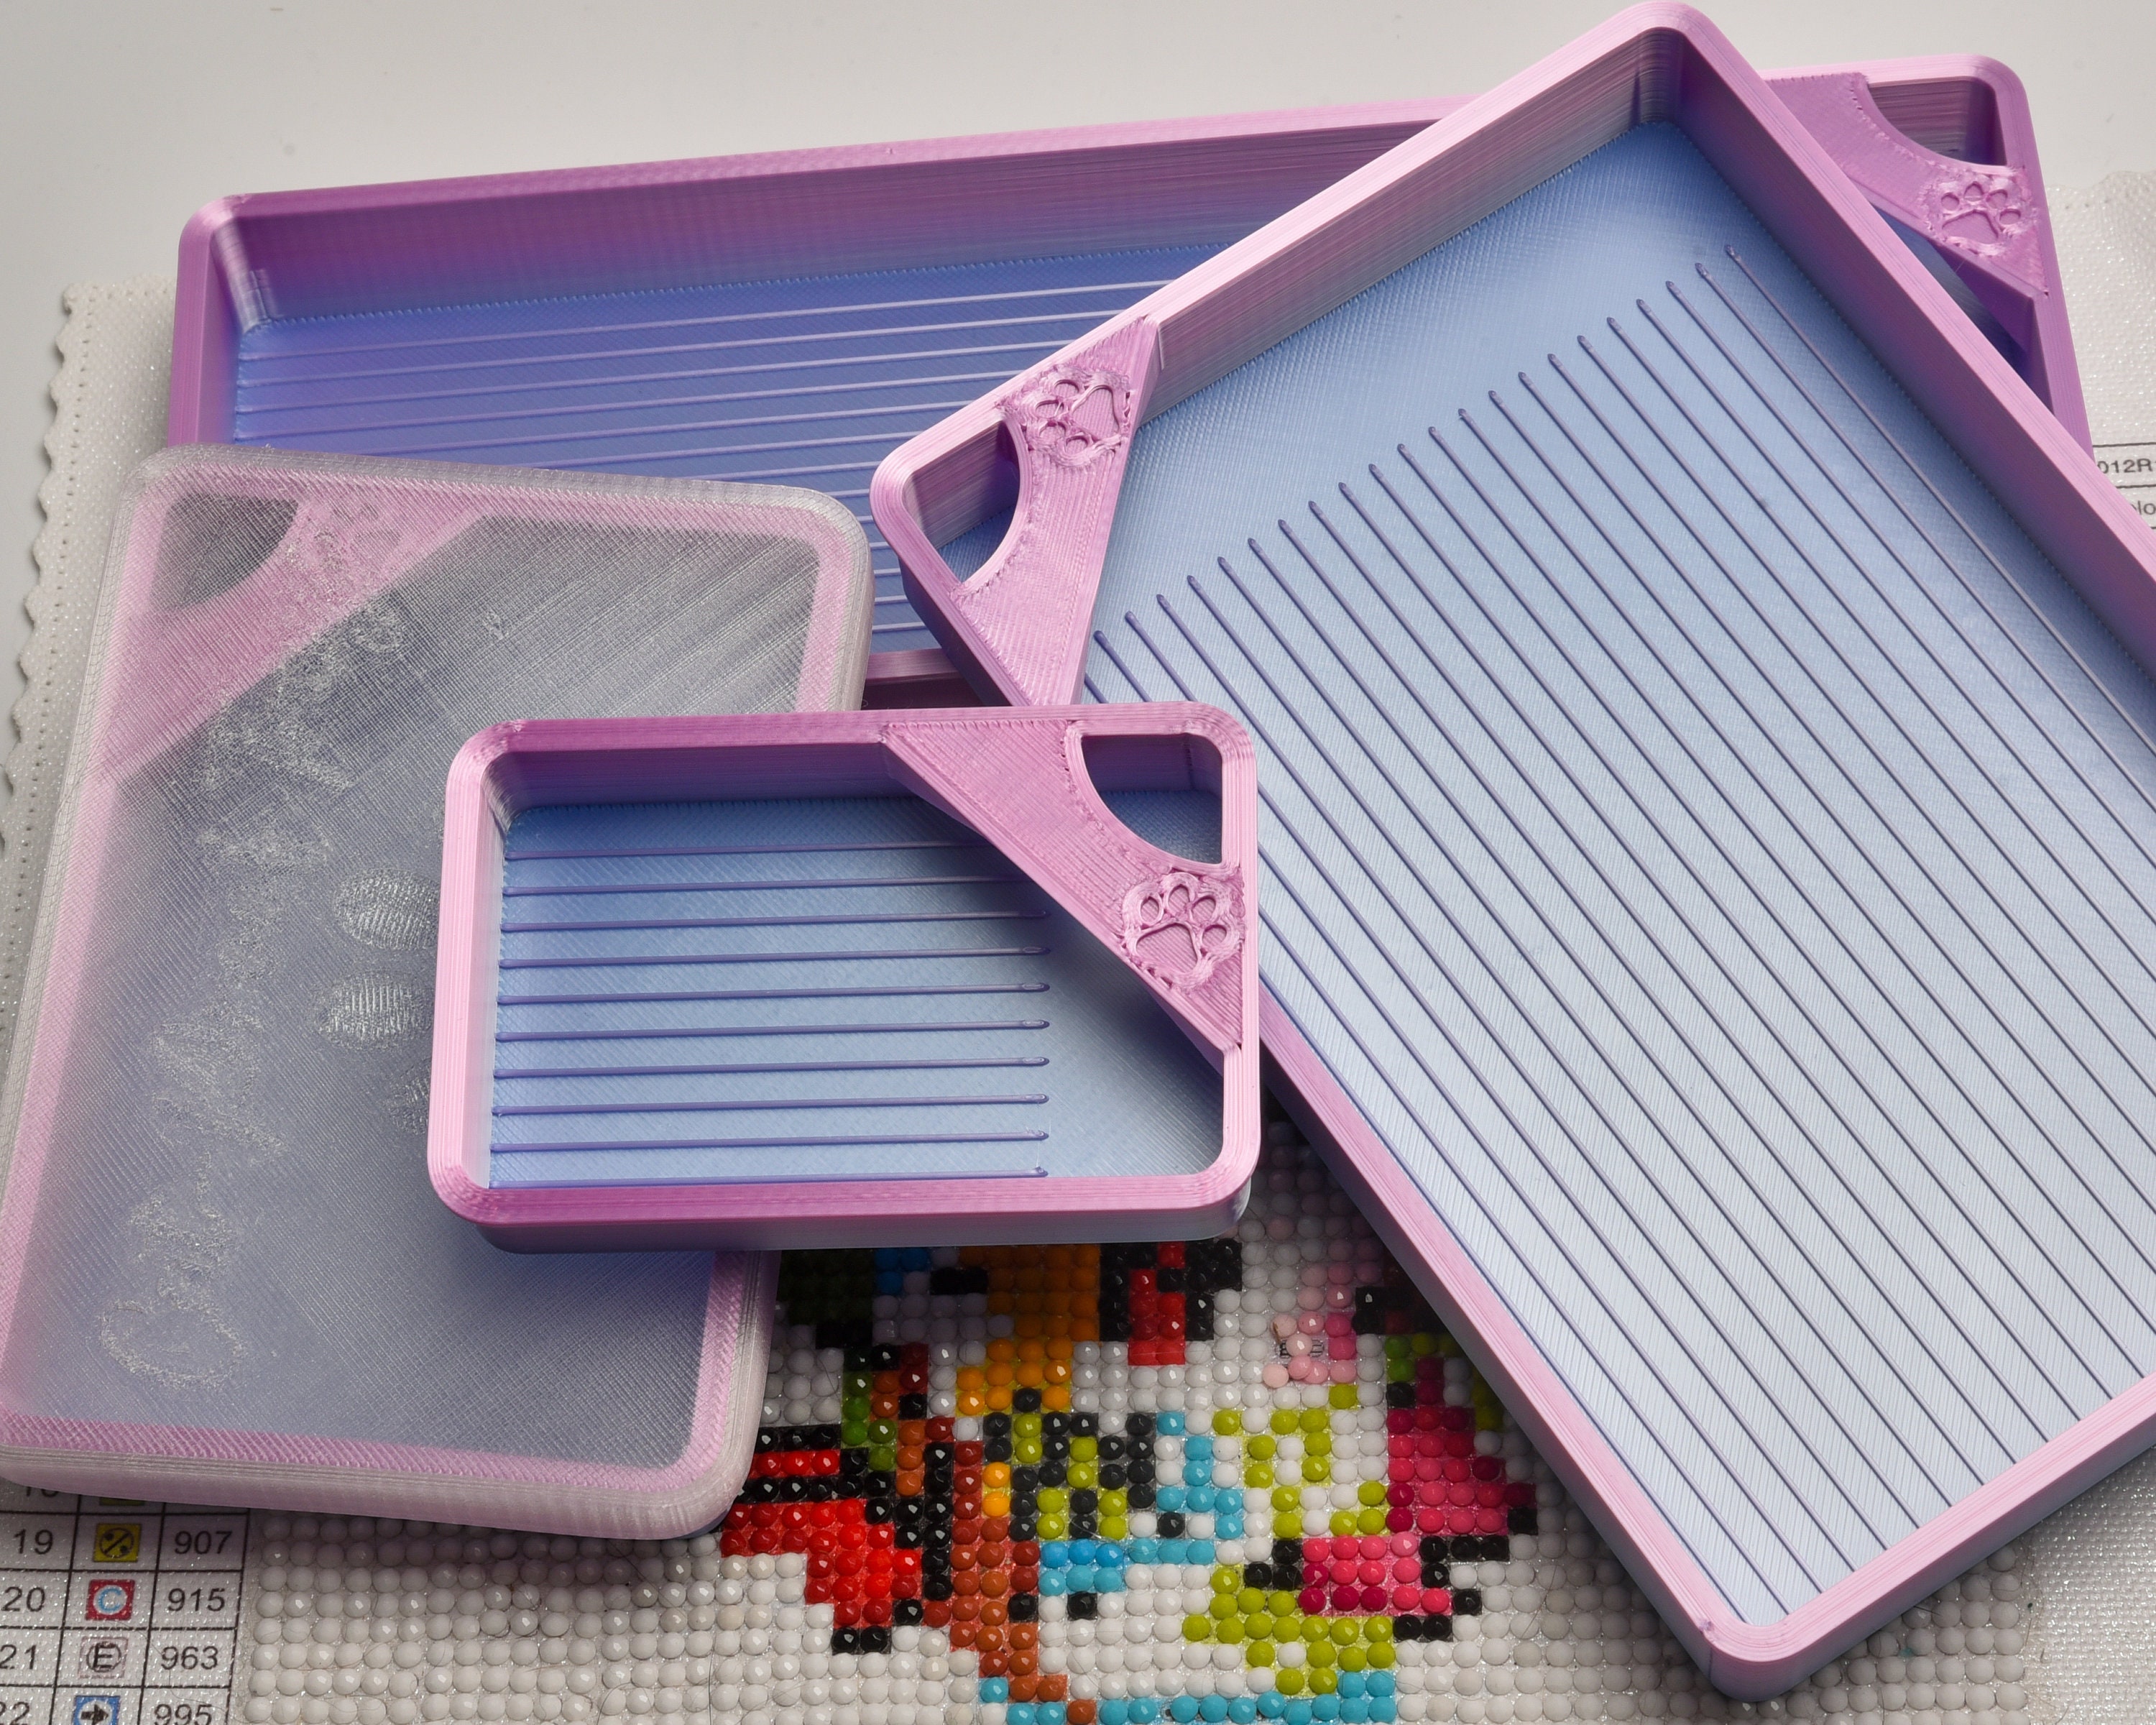 ☆Unboxing Firefly Diamond Art☆ ‐ my very FIRST trays. These are the most  innovative 3d printed trays 